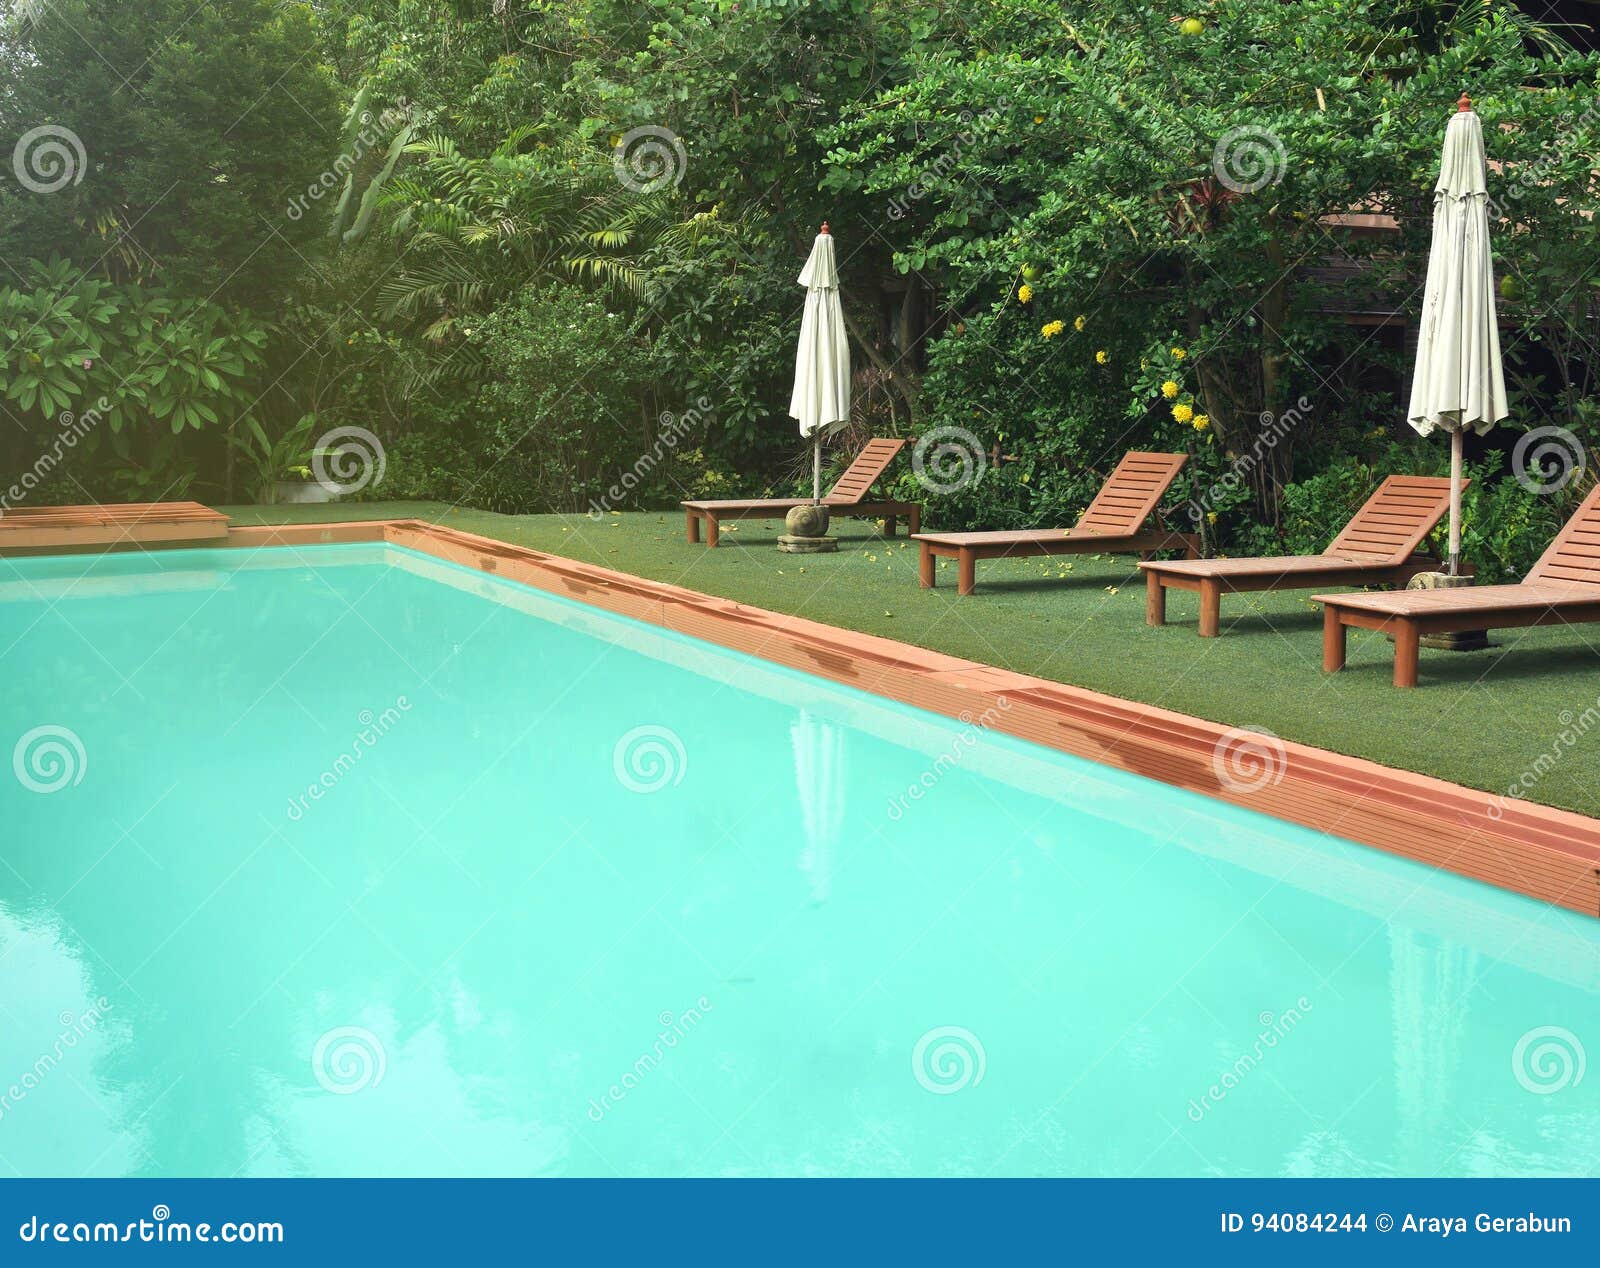 Tranquil Blue Pool In The Morning With Poolside Chairs And